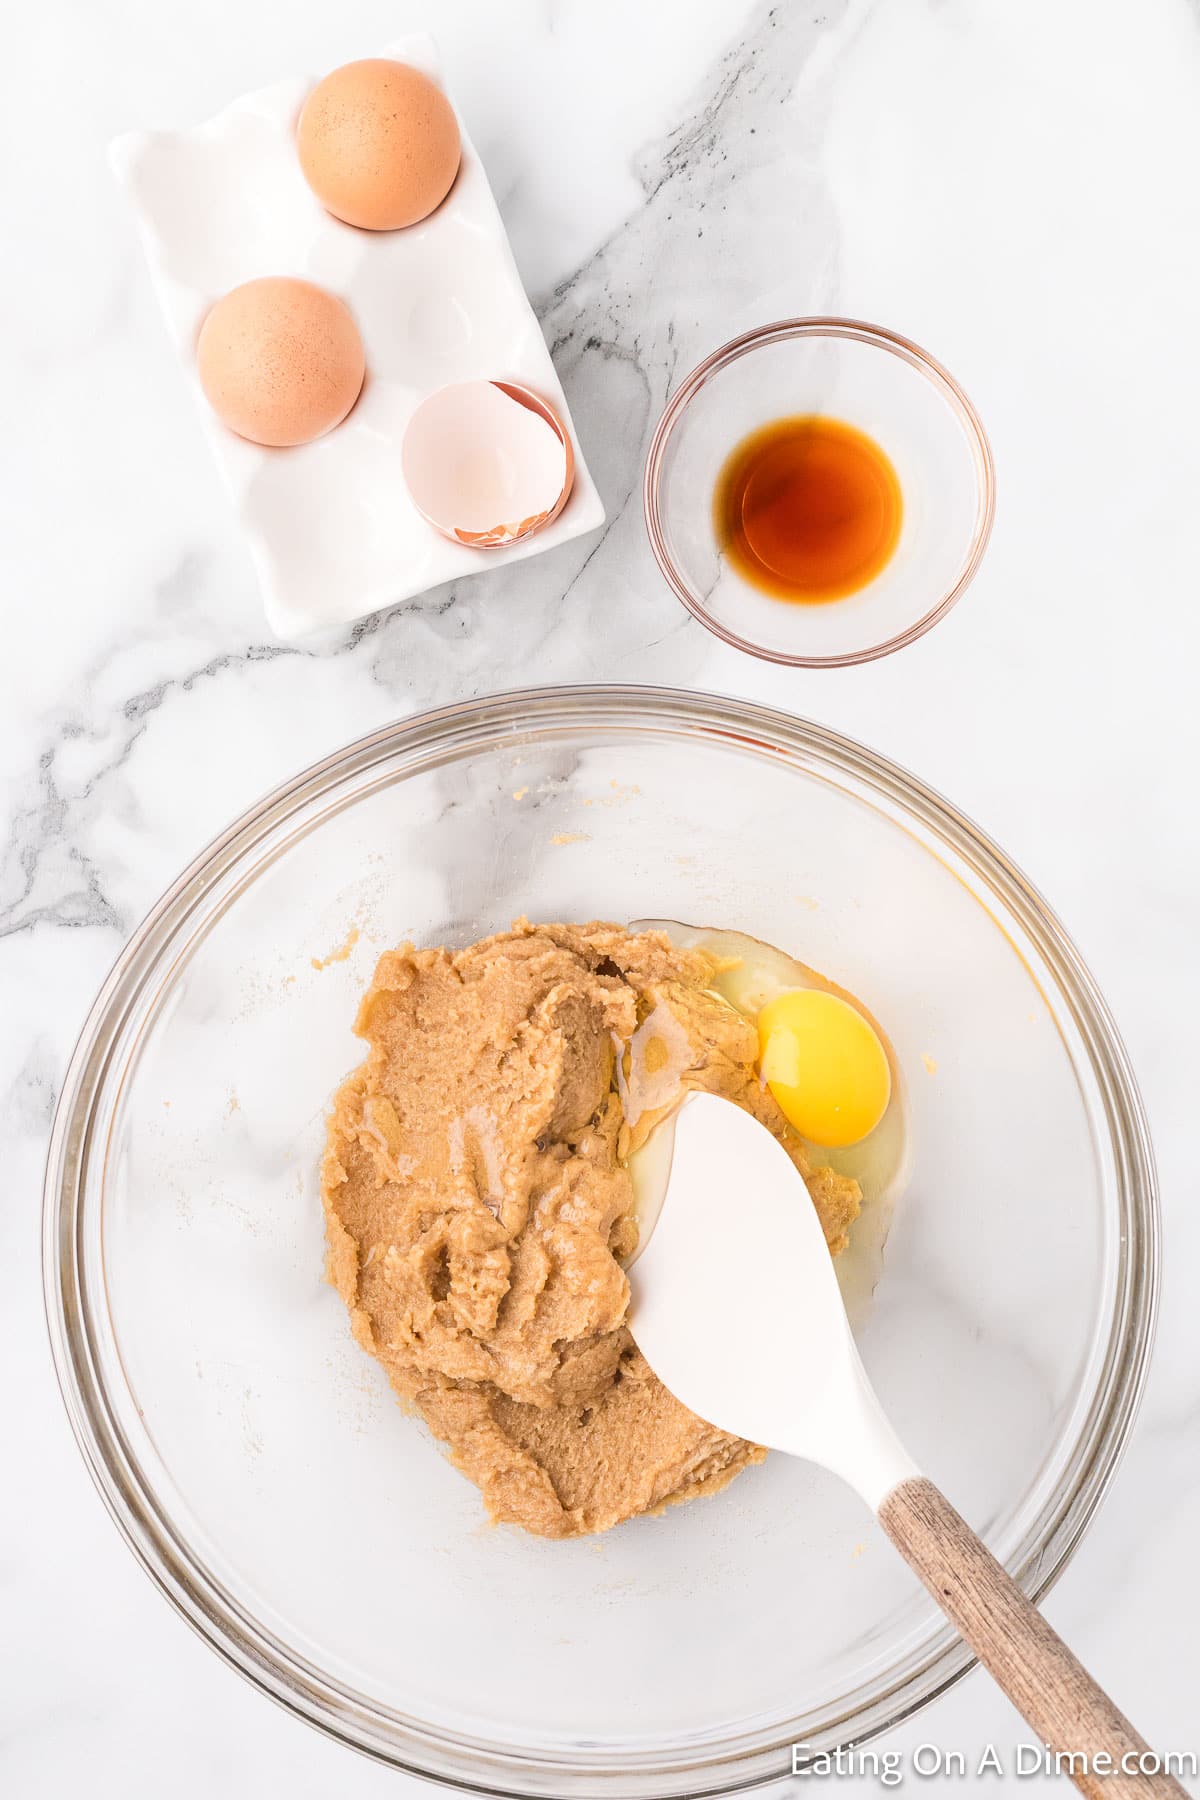 A marble countertop holds a mixing bowl with dough mixture, an egg, and a white spatula. To the side, there's a small bowl of vanilla extract and a ceramic dish with two whole brown eggs and one cracked shell—perfect for starting your Chocolate Chip Cookie Cake recipe.